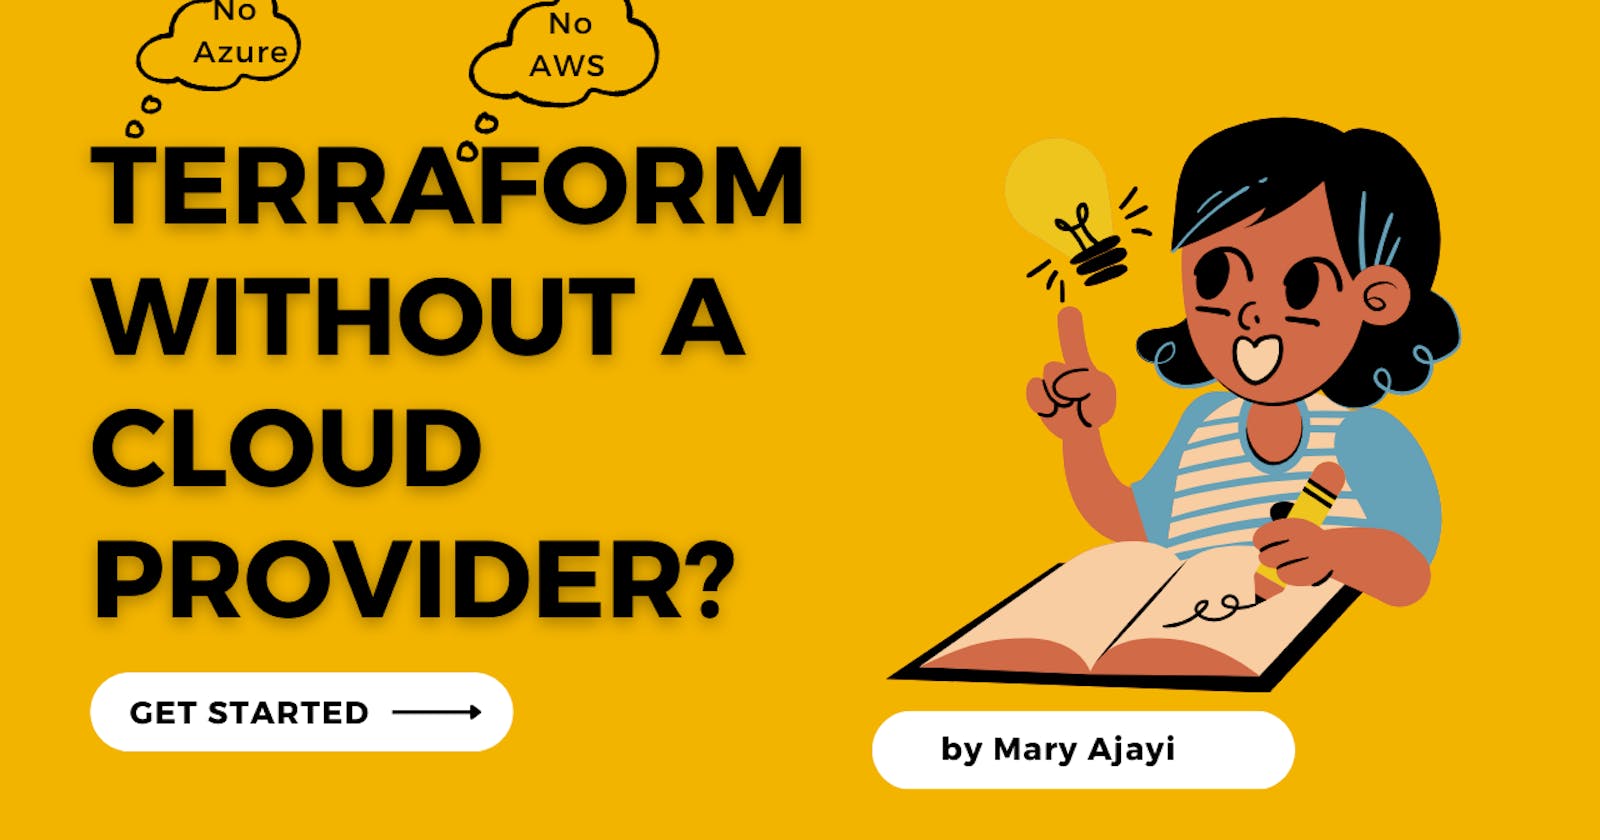 Getting Started with Terraform: A Guide Without a Cloud Provider